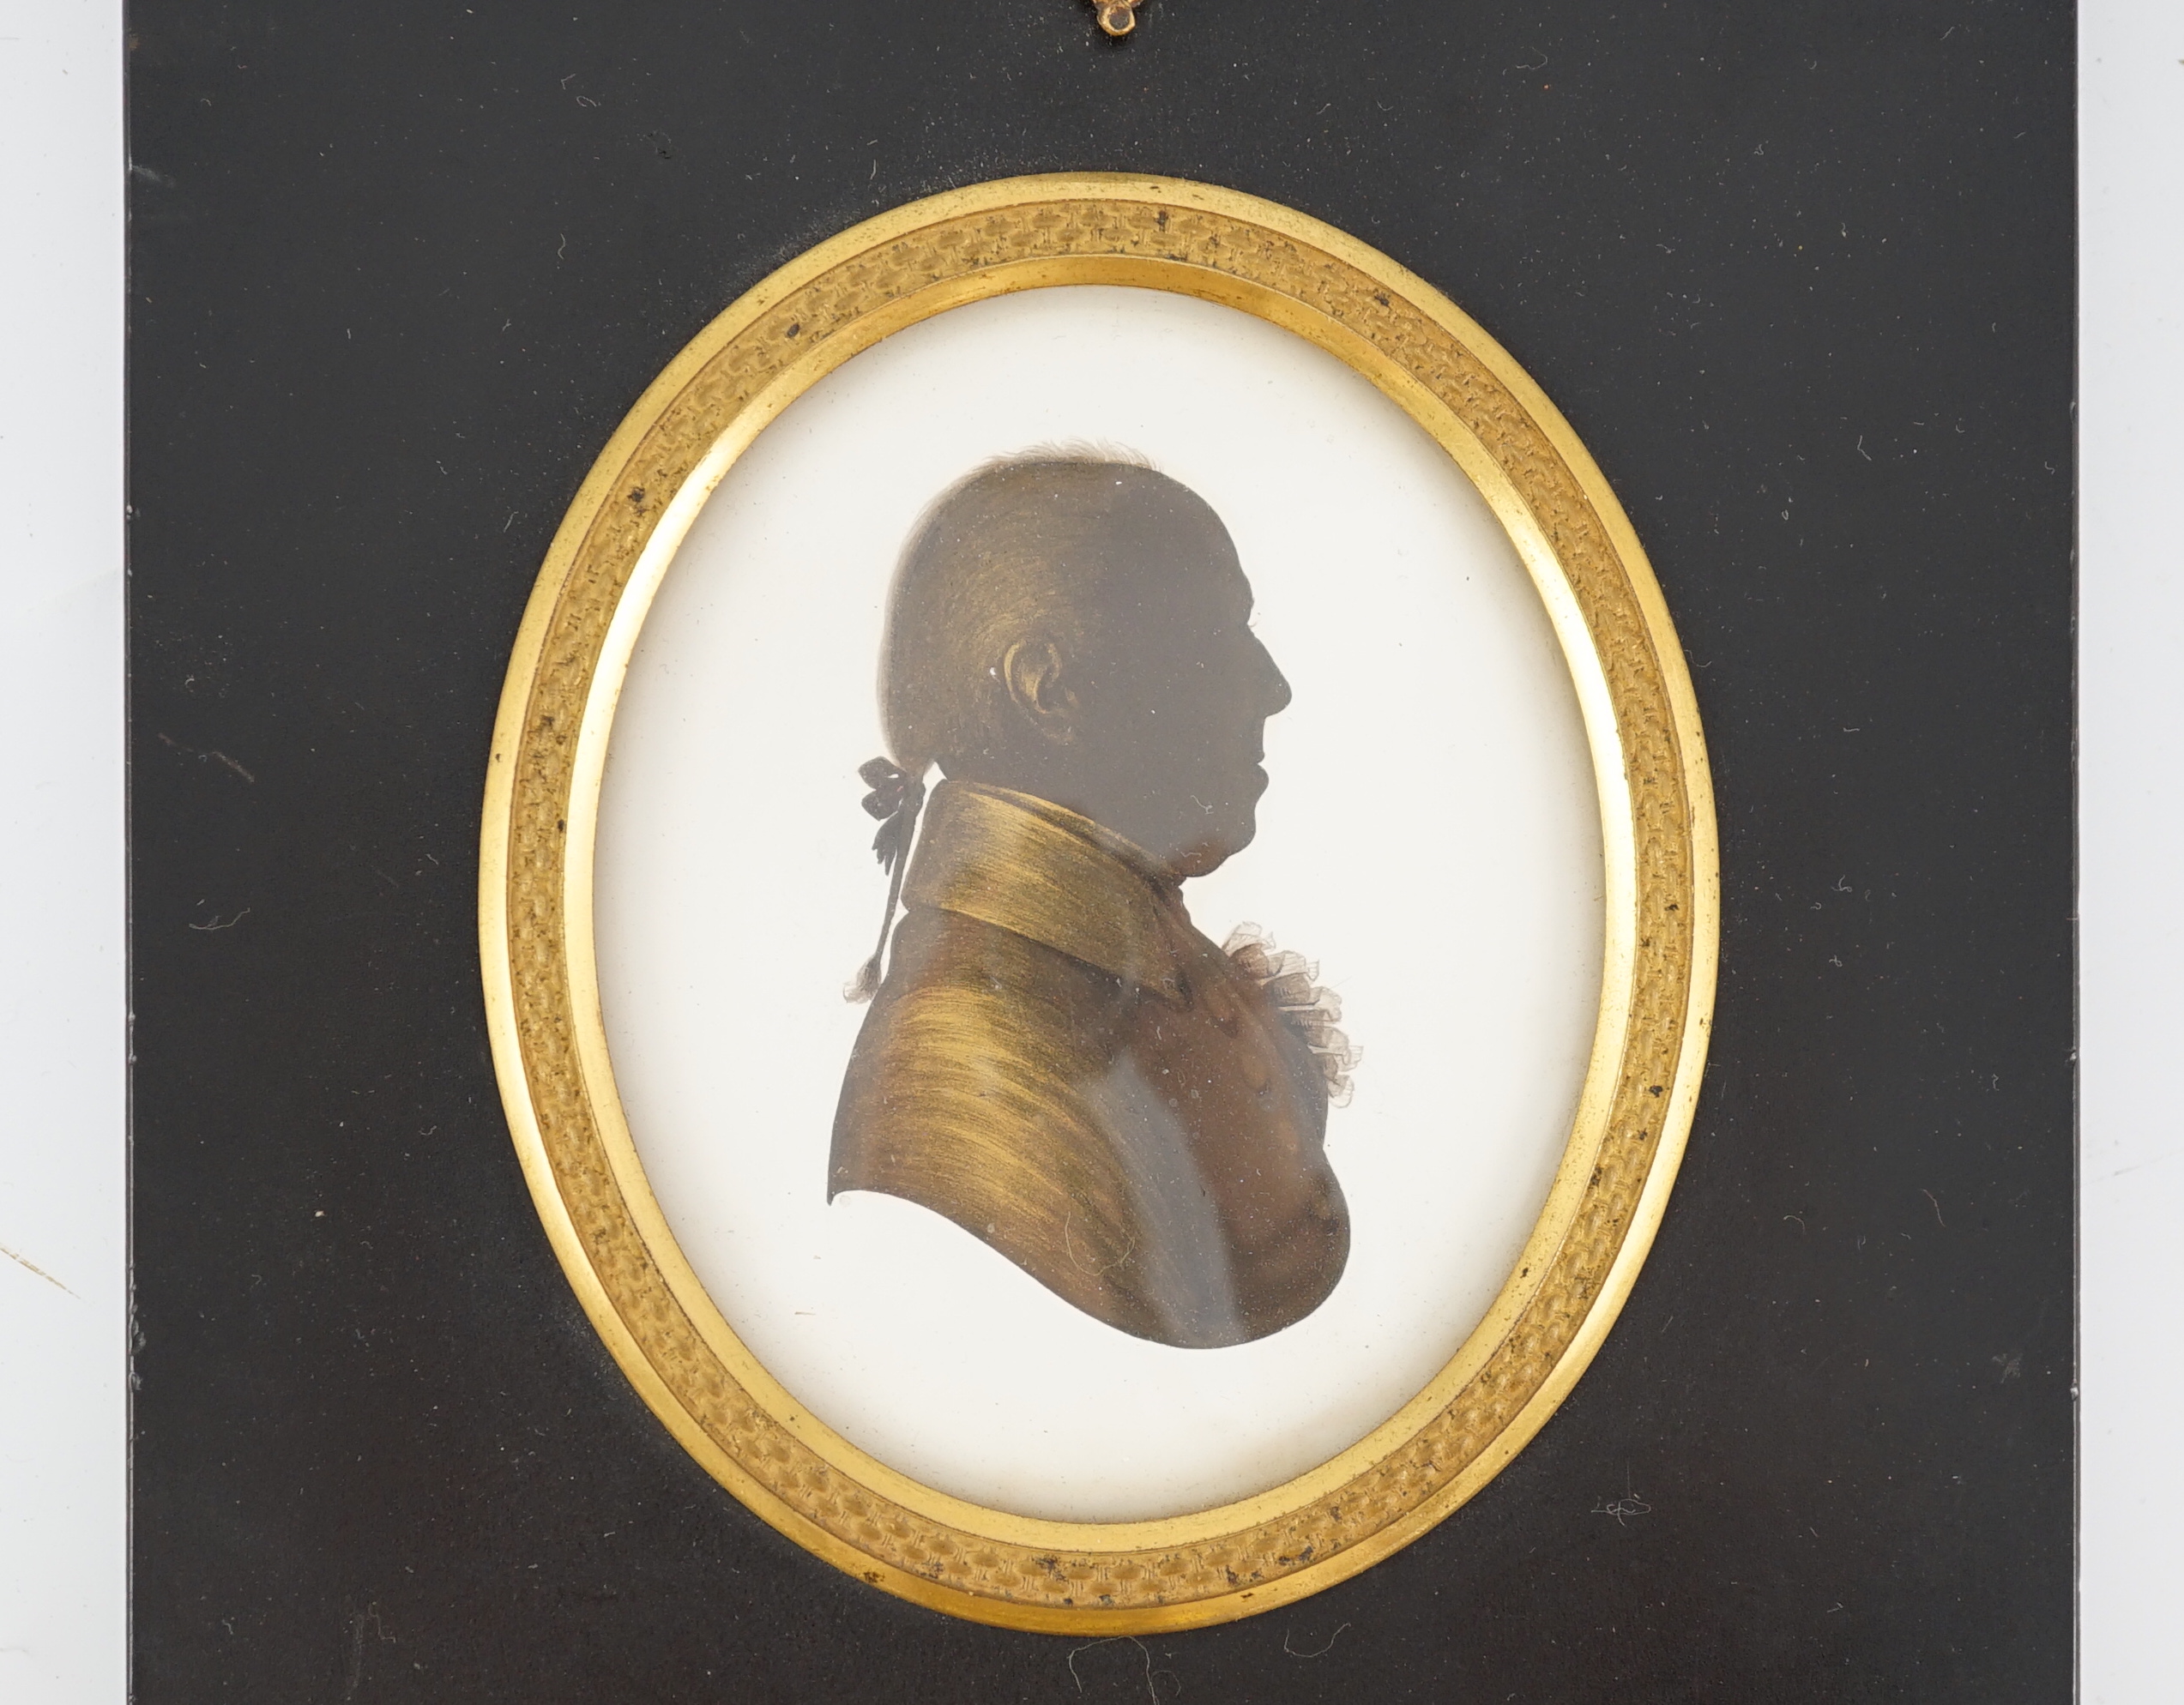 John Miers (1756-1821), Silhouette of a gentleman, painted and bronzed plaster, 8 x 6.5cm.